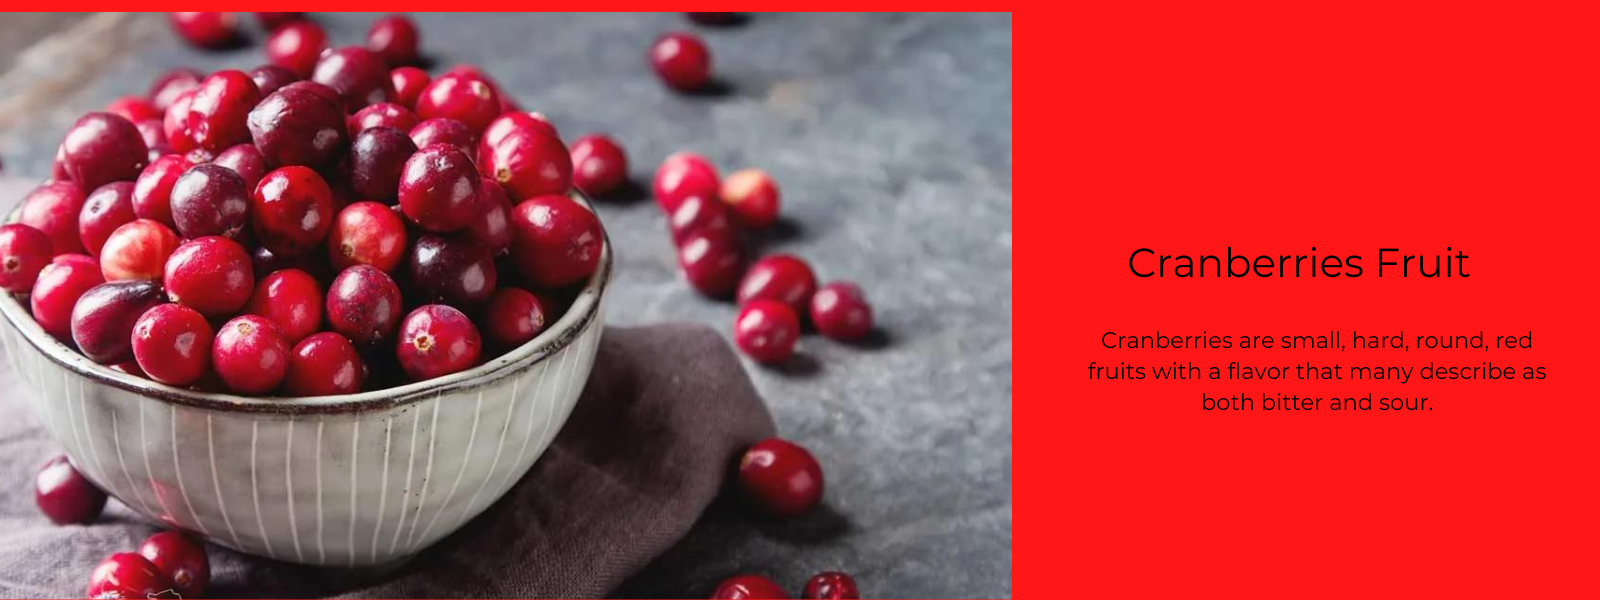 Cranberries Fruit - Health Benefits, Uses and Important Facts